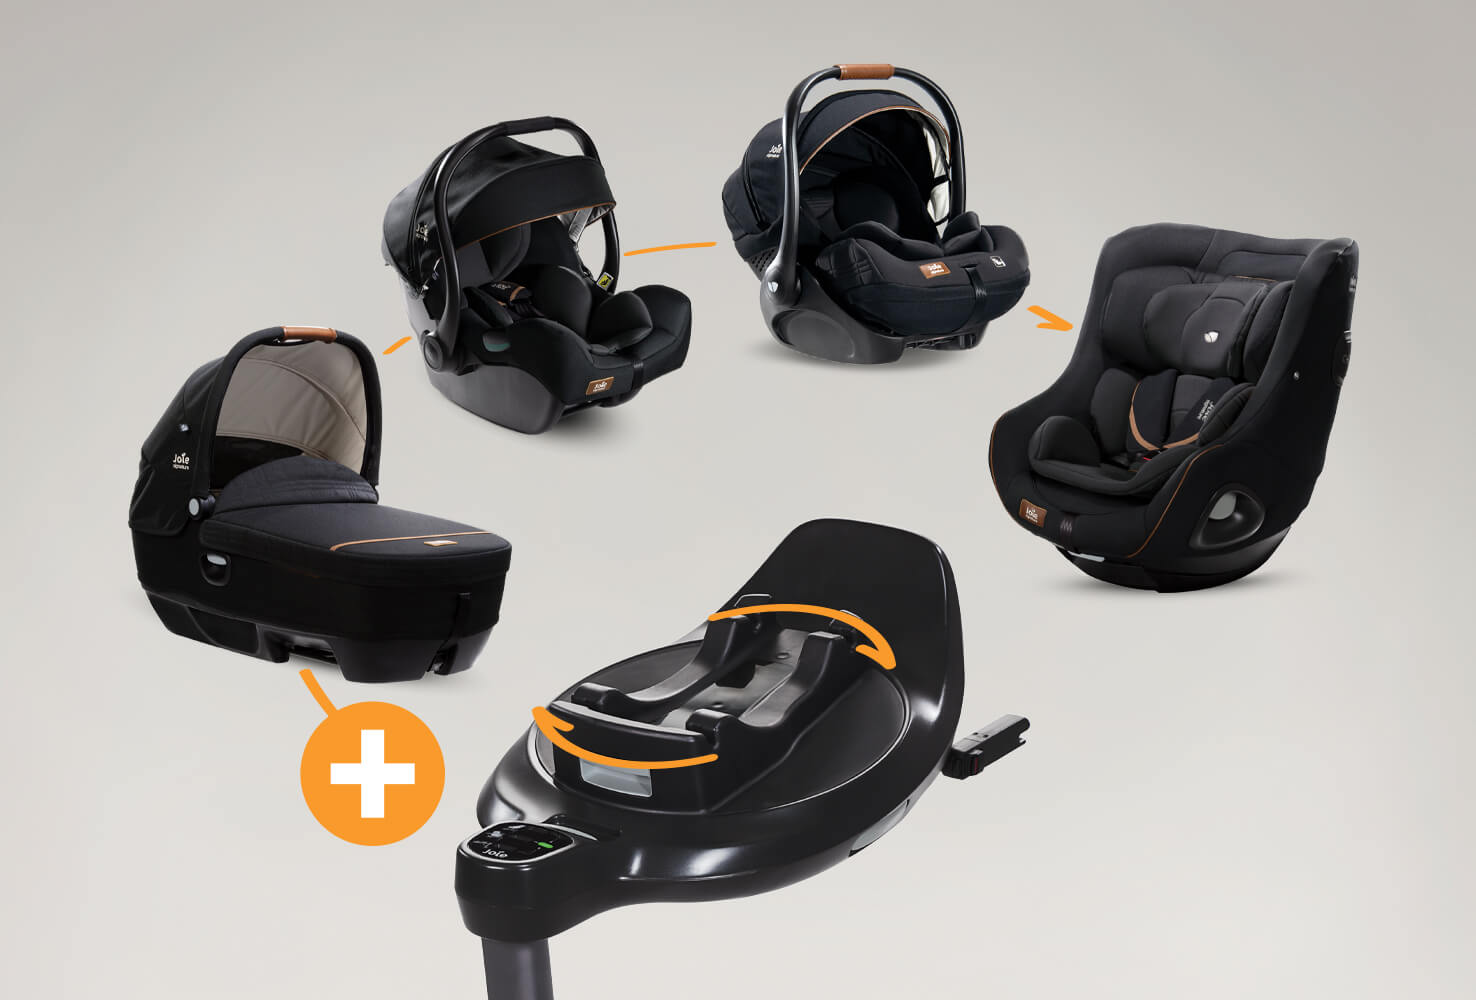 All products in the Joie Encore Spinning System arranged in an ellipse, including the i-Base Encore, Calmi R129 car bed, i-Jemini infant car seat, i-Level infant car seat, and i-Harbour toddler car seat